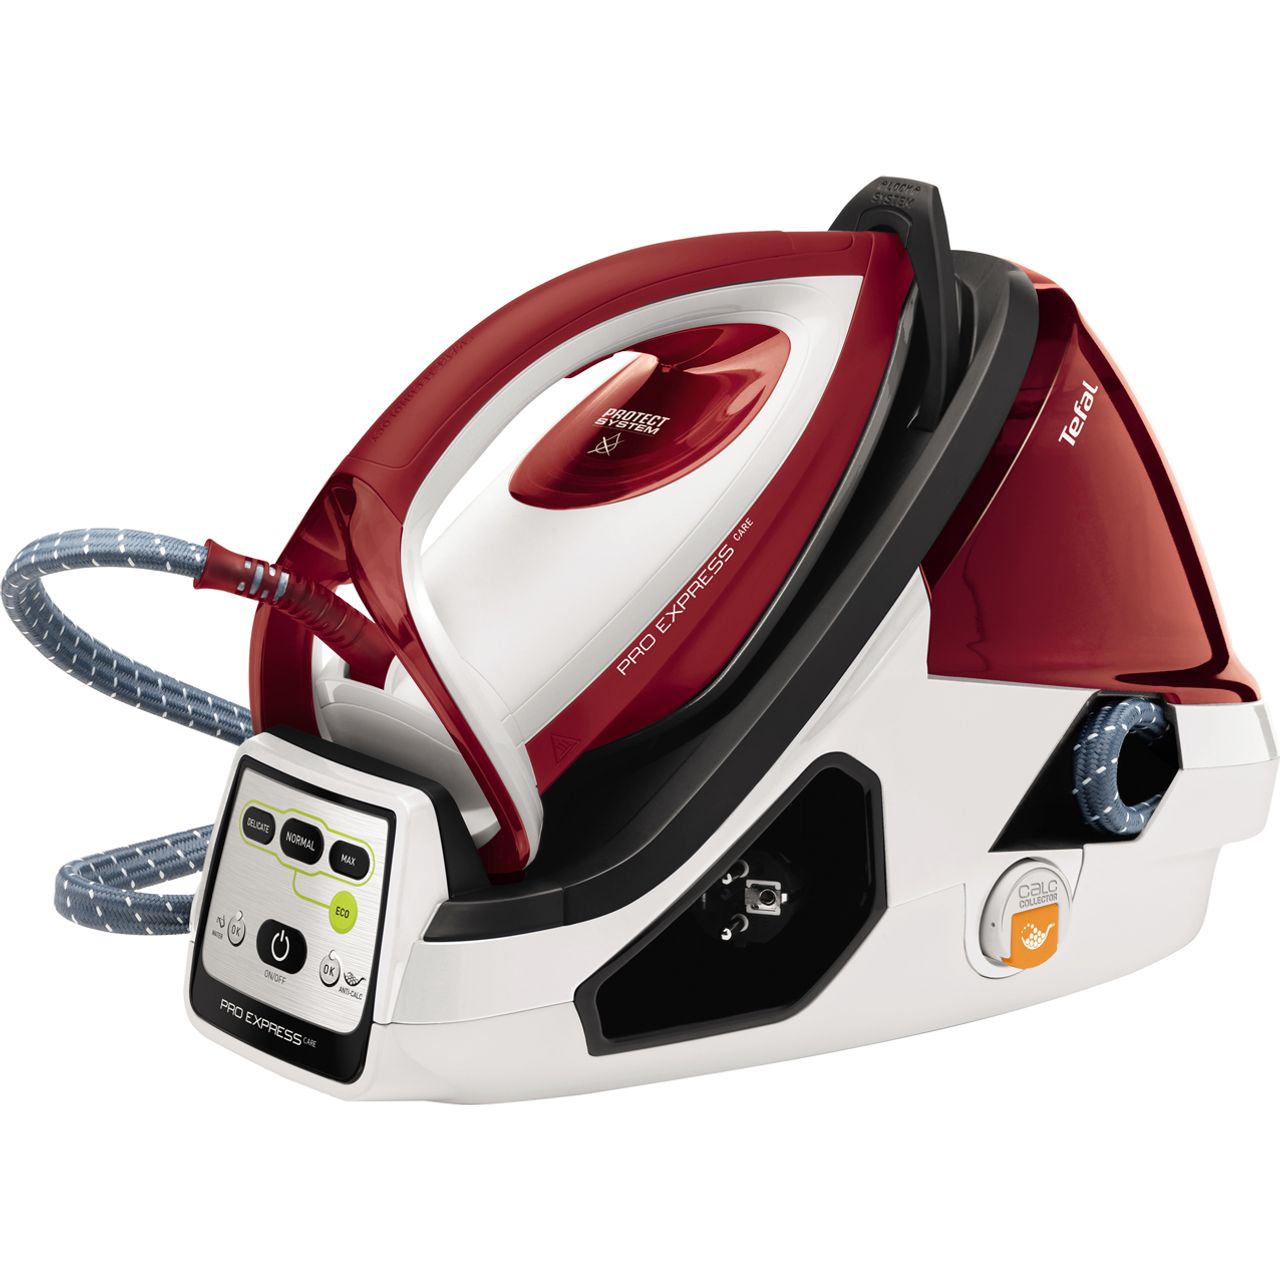 Tefal Pro Express Care Anti Scale GV9061 Pressurised Steam Generator Iron Review